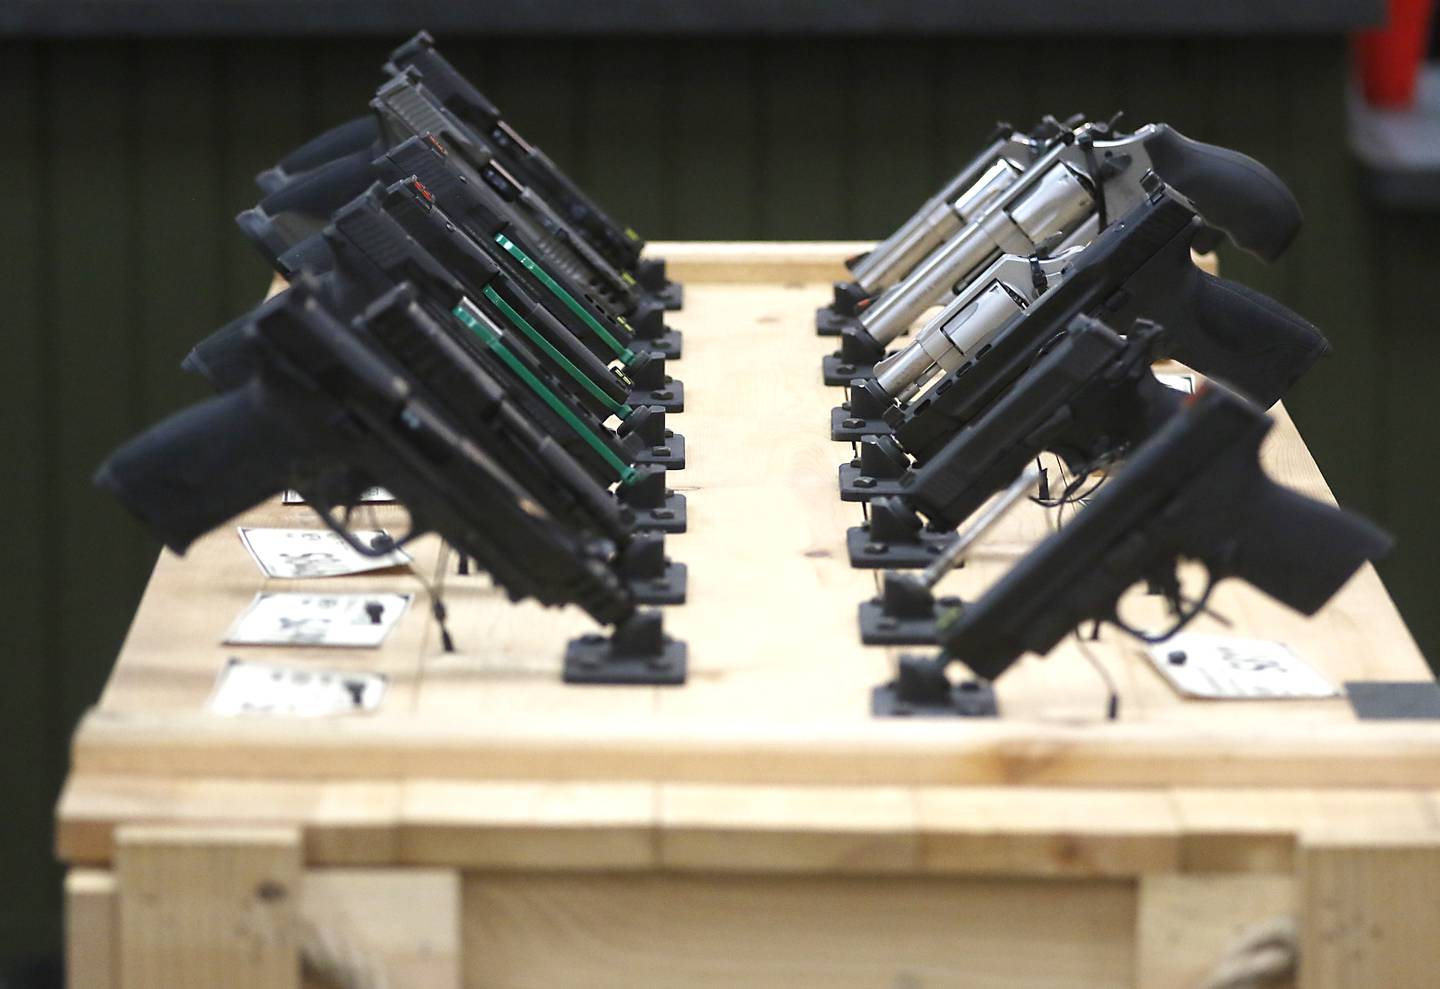 Guns for sale on Friday, Aug. 11, 2023, at Marengo Guns in Marengo. The Illinois Supreme Court ruled a ban on high-powered rifles and high-capacity magazines did not violate clauses of the Illinois Constitution aimed at ensuring laws are equally applied to all.